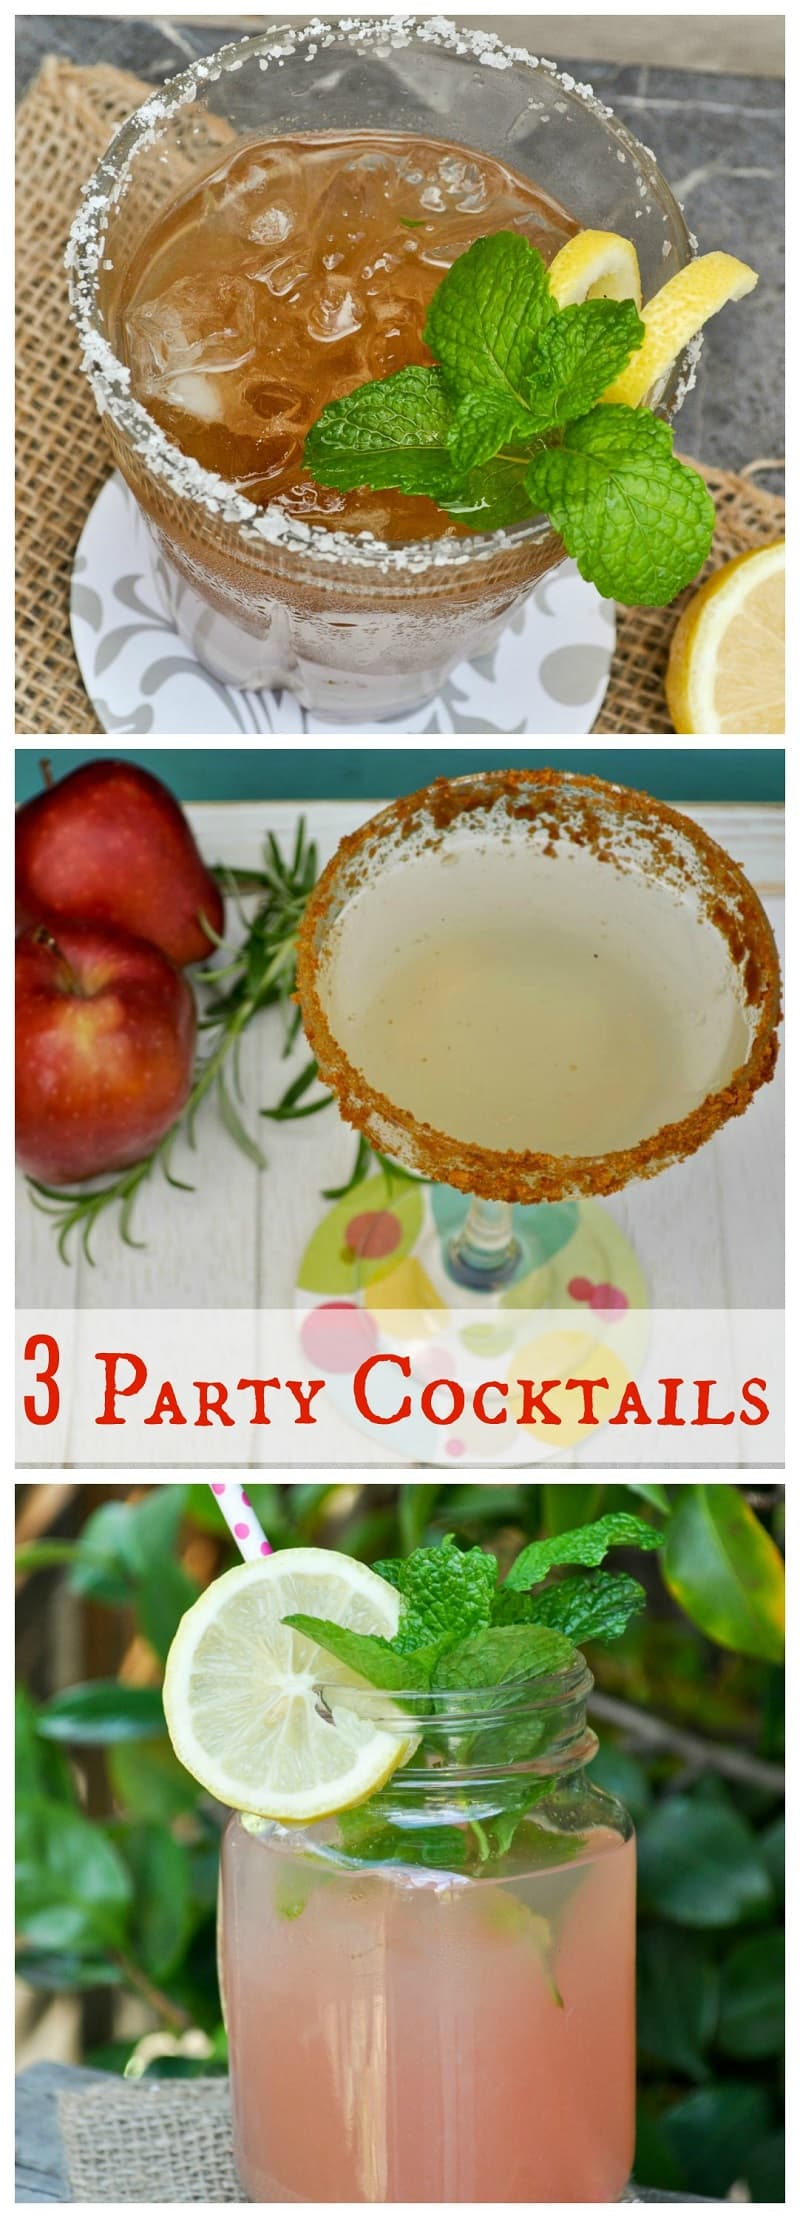 3 Easy Party Cocktails Recipes